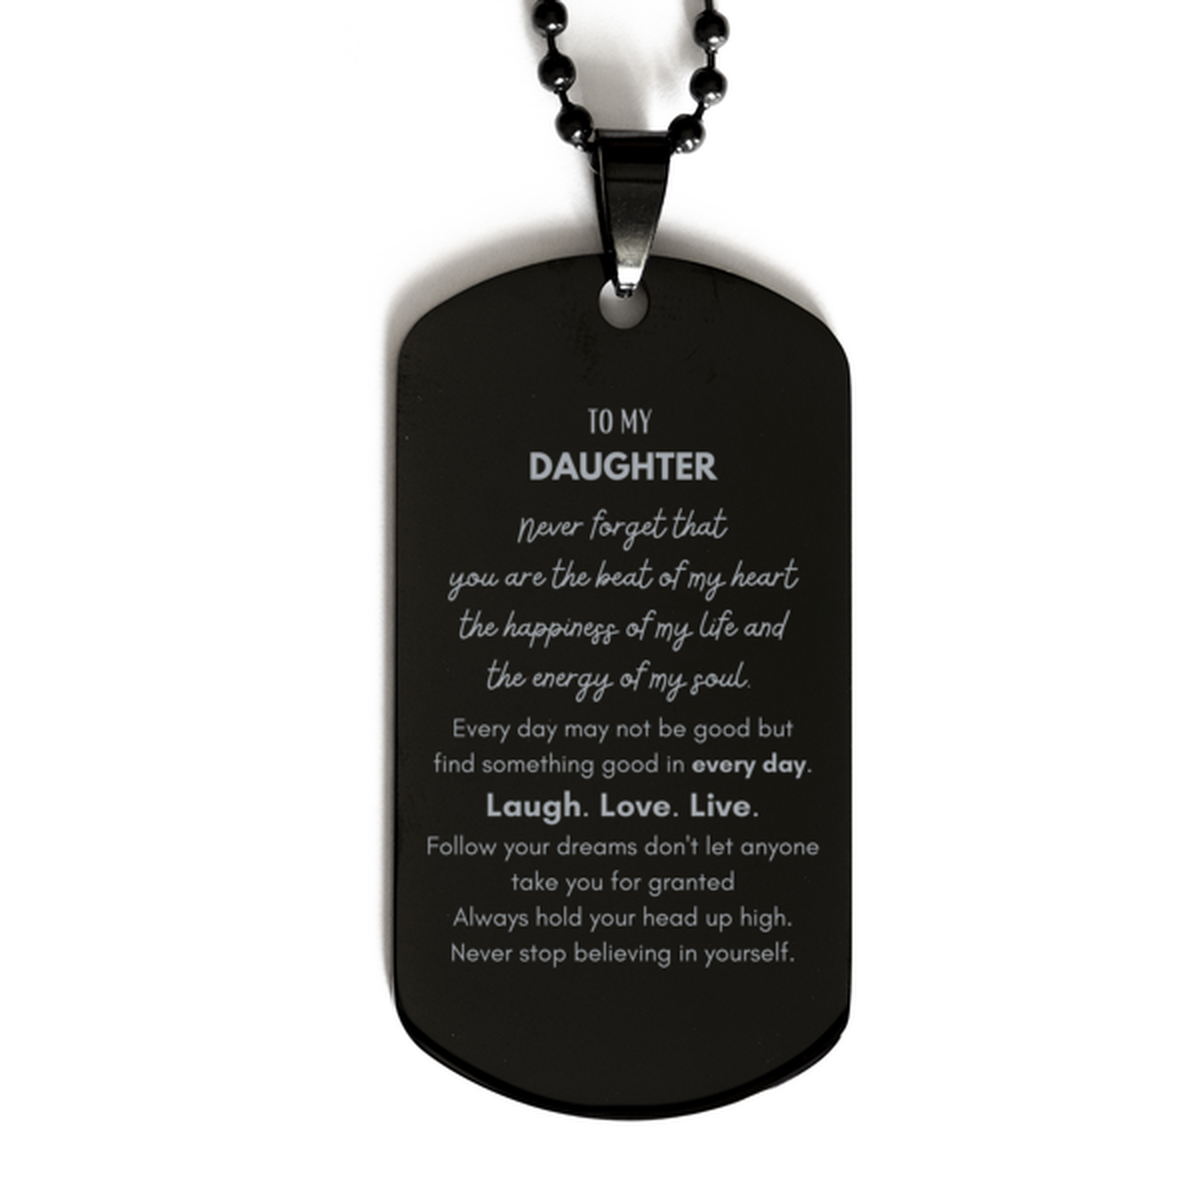 To My Daughter Dogtag Gifts, Christmas Daughter Black Dog Tag Present, Birthday Unique Motivational For Daughter, To My Daughter Never forget that you are the beat of my heart the happiness of my life and the energy of my soul